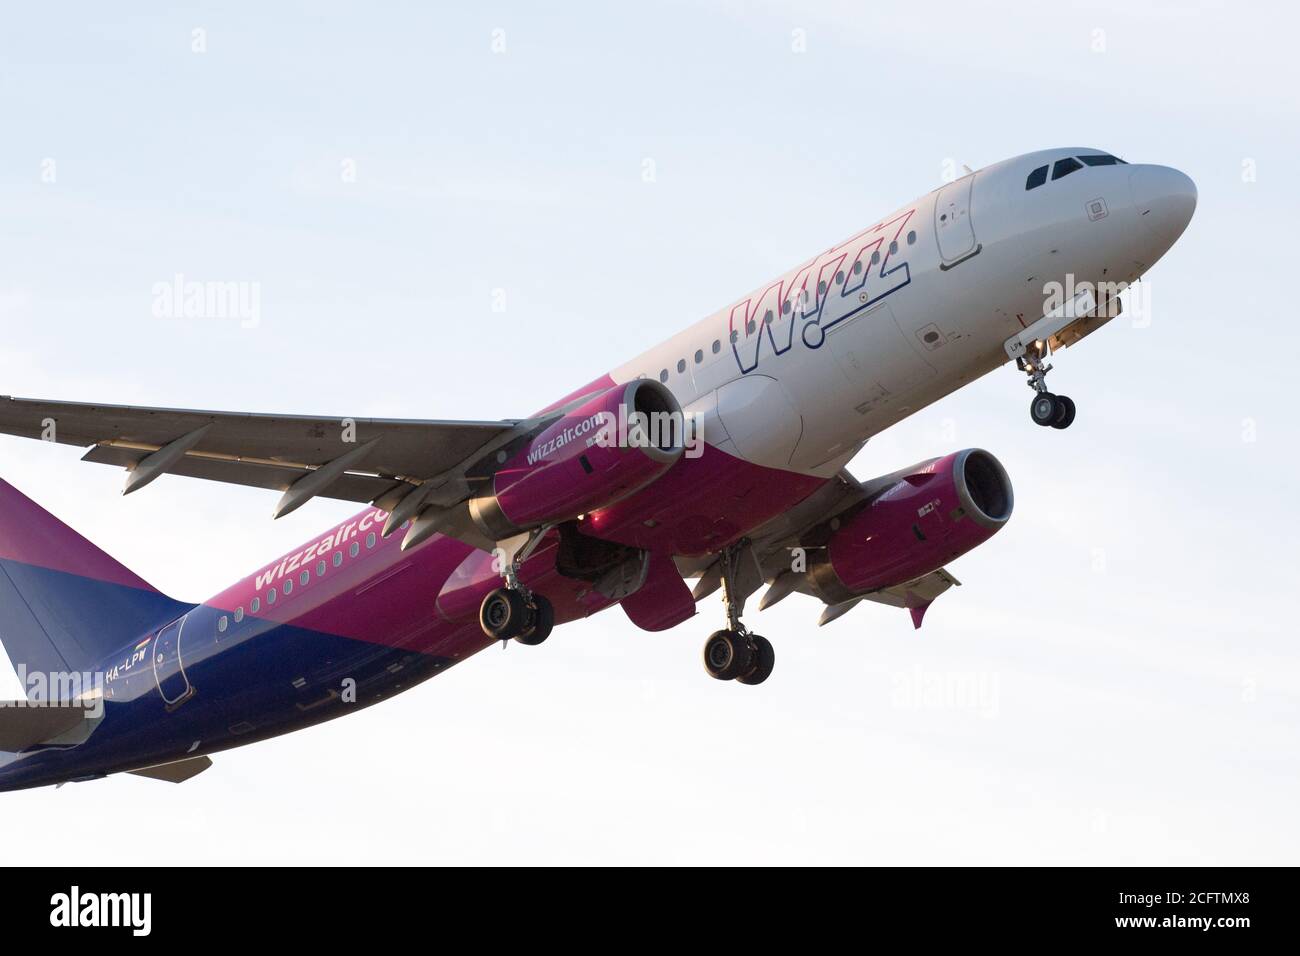 Low cost airline Wizz Air aircraft Airbus A320-232 in Gdansk, Poland. August 5th 2020 © Wojciech Strozyk / Alamy Stock Photo *** Local Caption *** Stock Photo